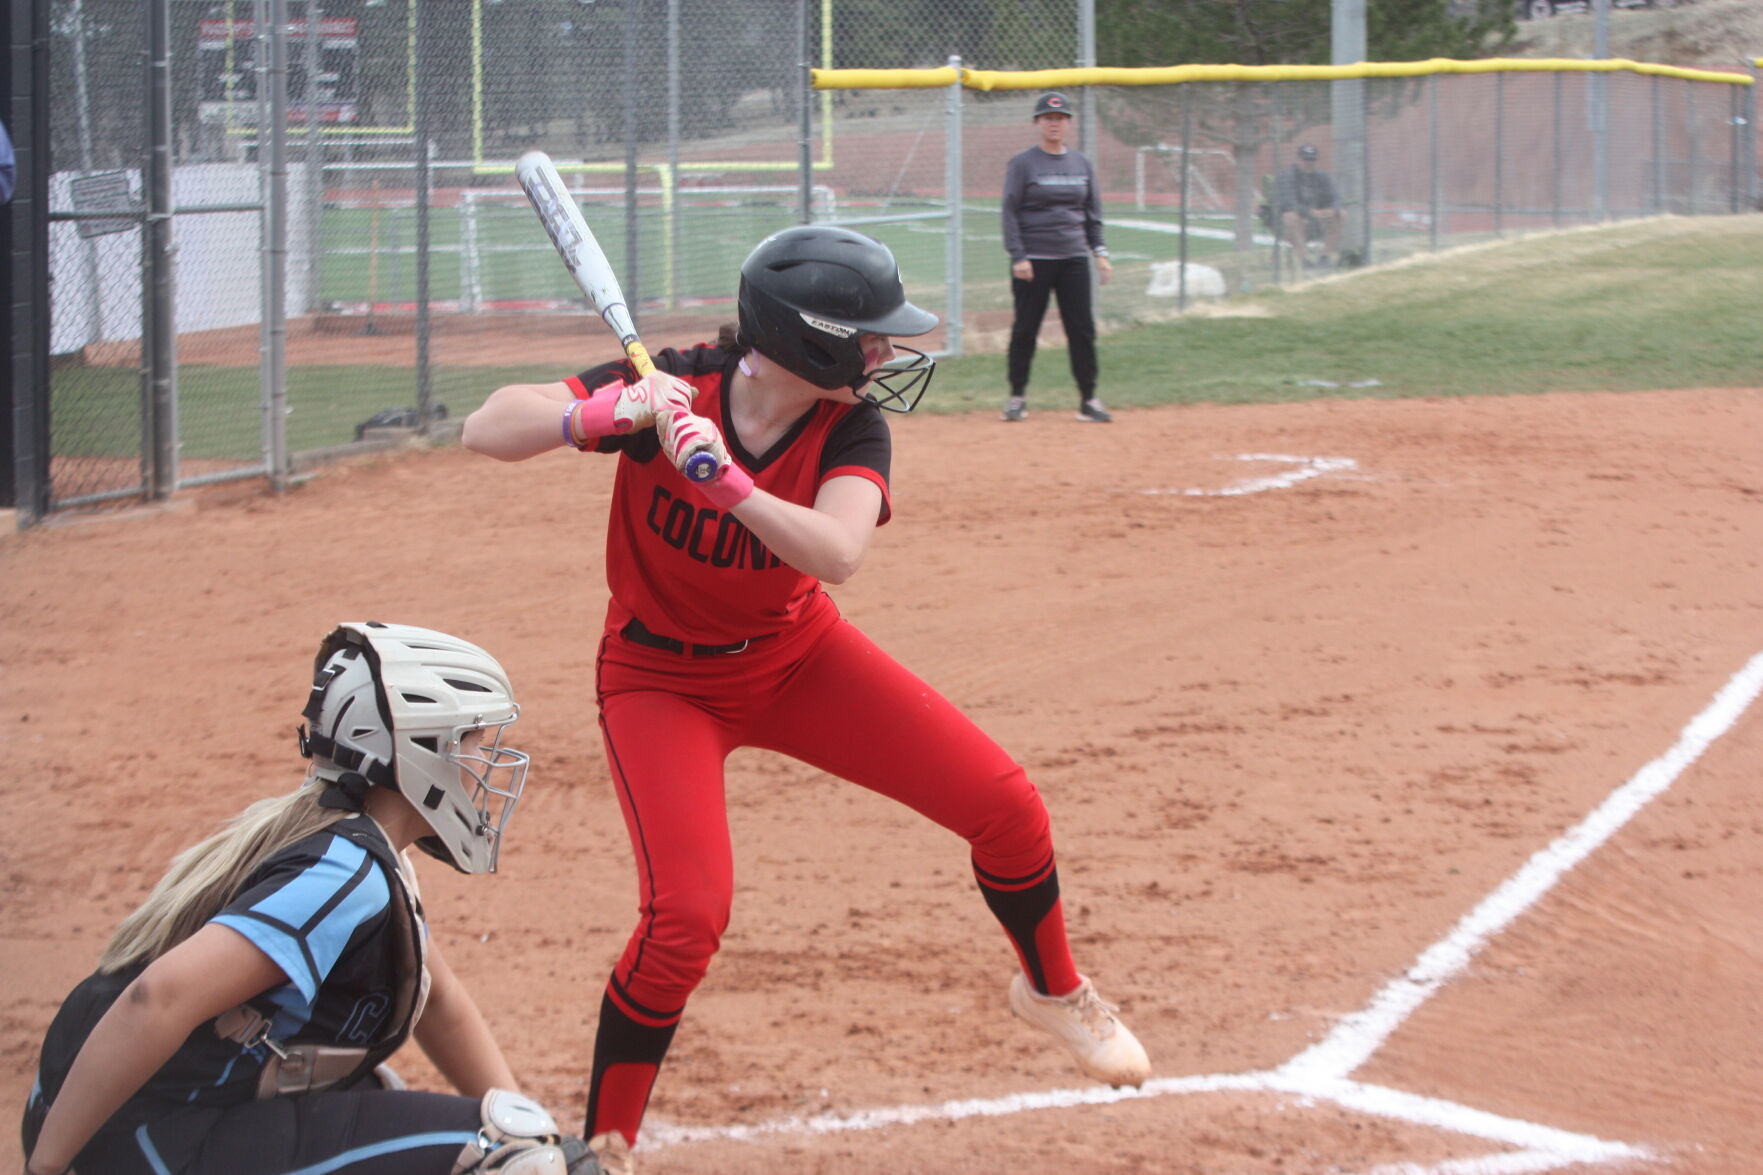 Coconino Softball Falls to Eastmark in State Quarterfinals, Mendez Shines with 7 Strikeouts